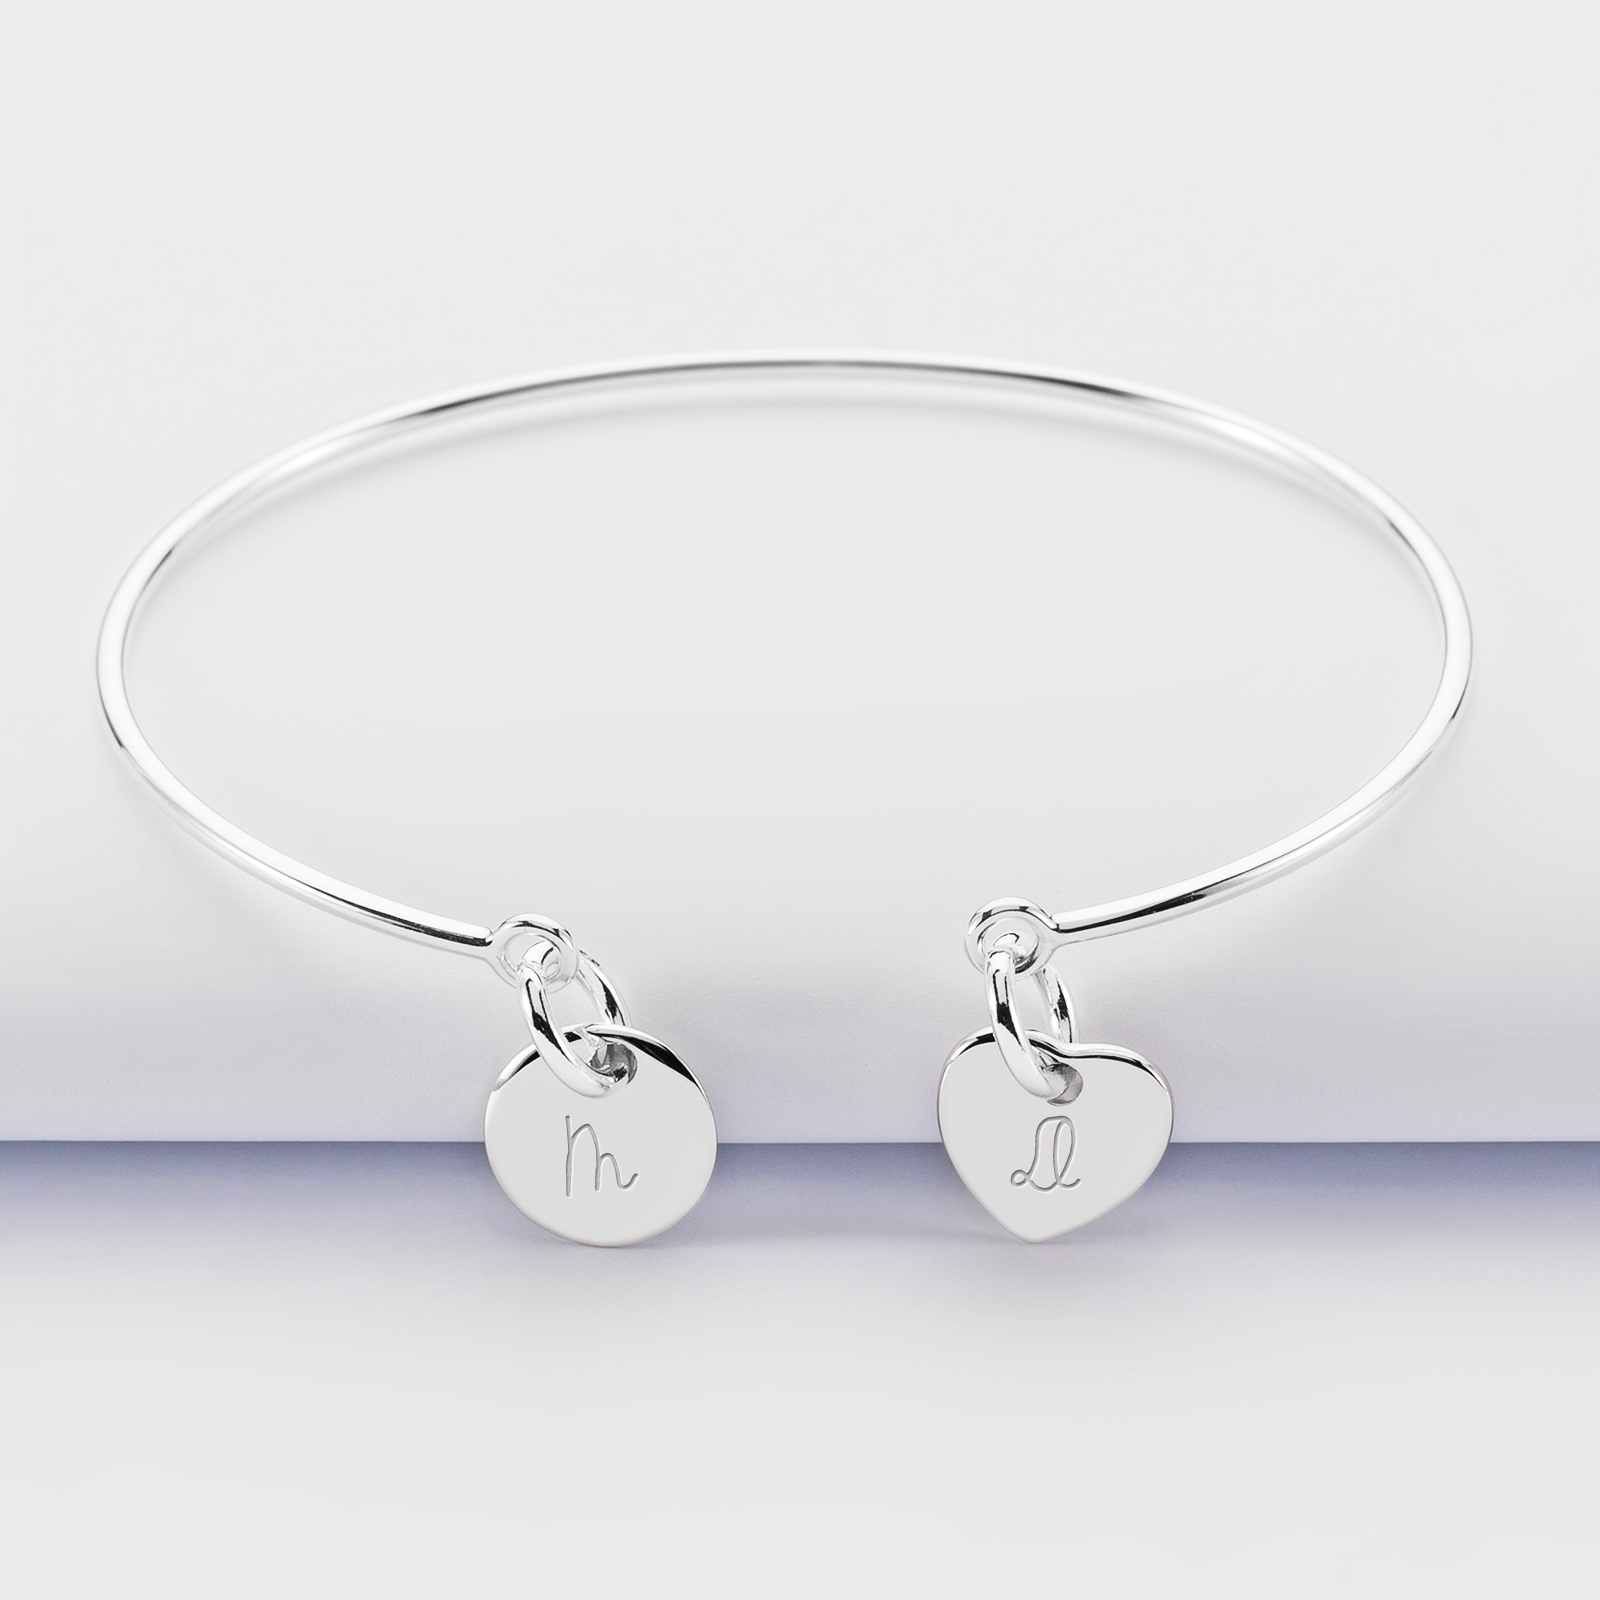 Personalised bangle with engraved round silver initials medallions and 10mm - 1